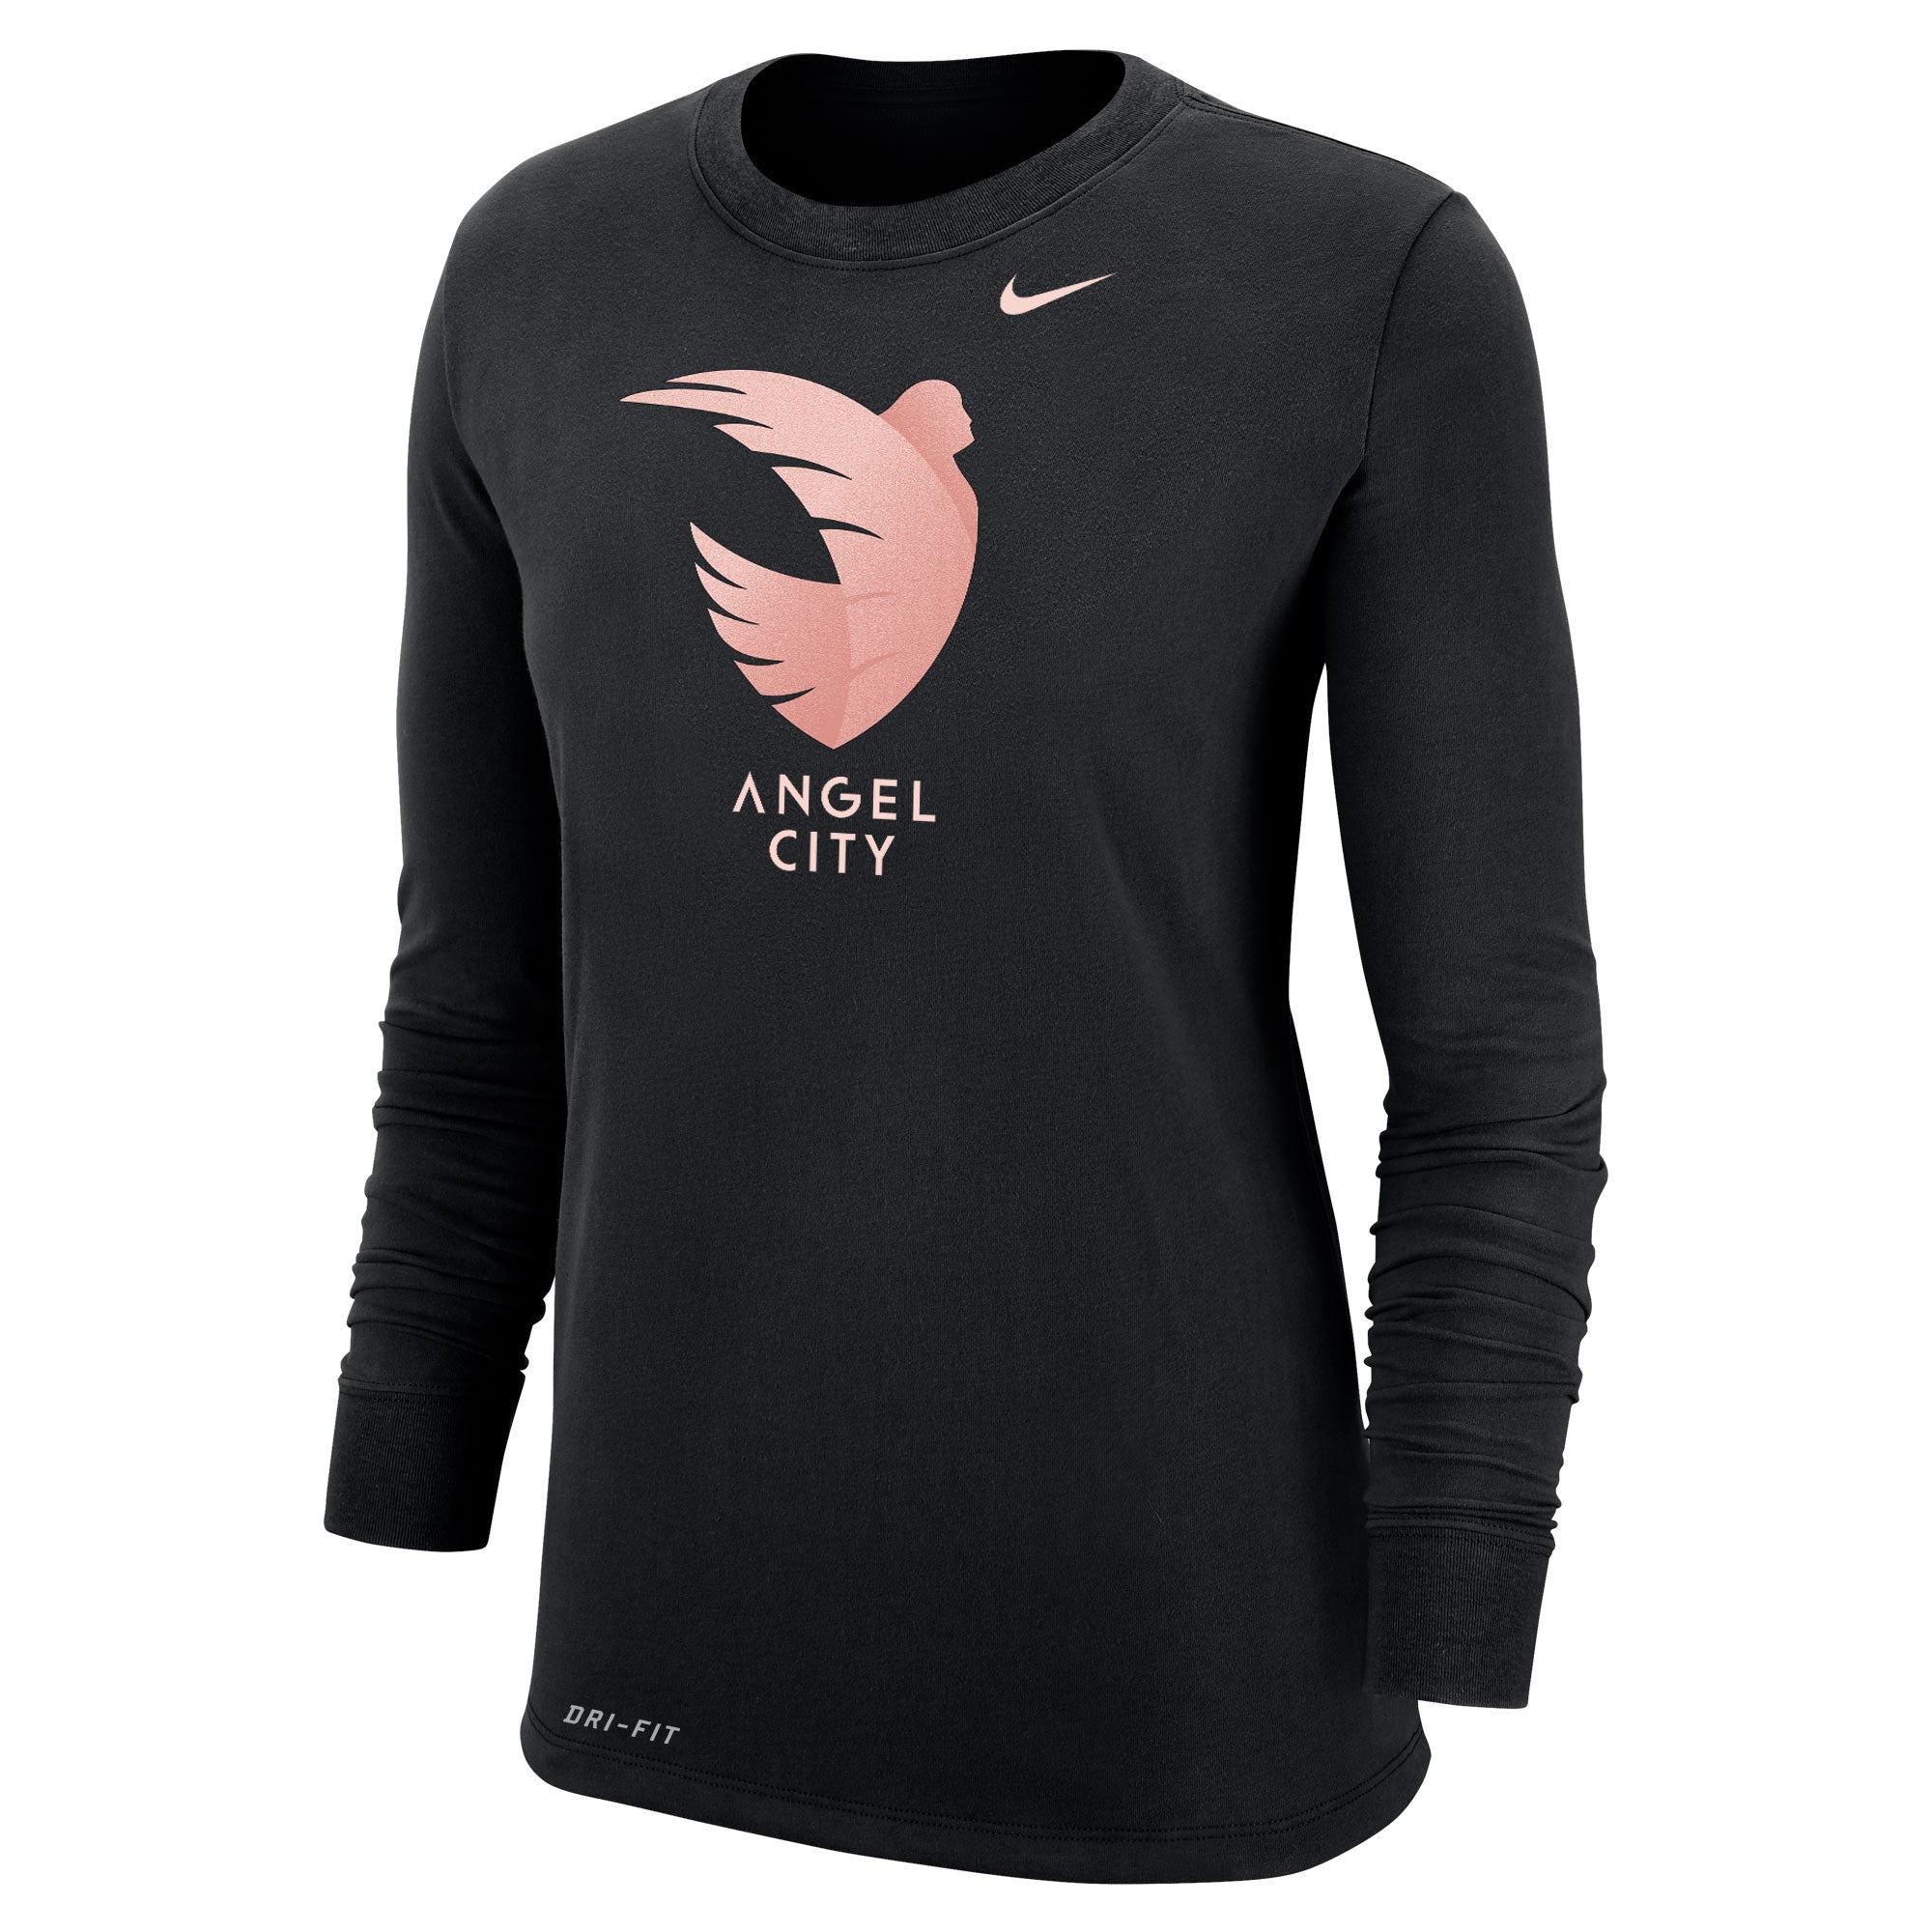 Angel City Football Club - Headed to Banc of California Stadium today?! 👀  Don't forget to grab some of your favorite Angel City gear in-store 🙌